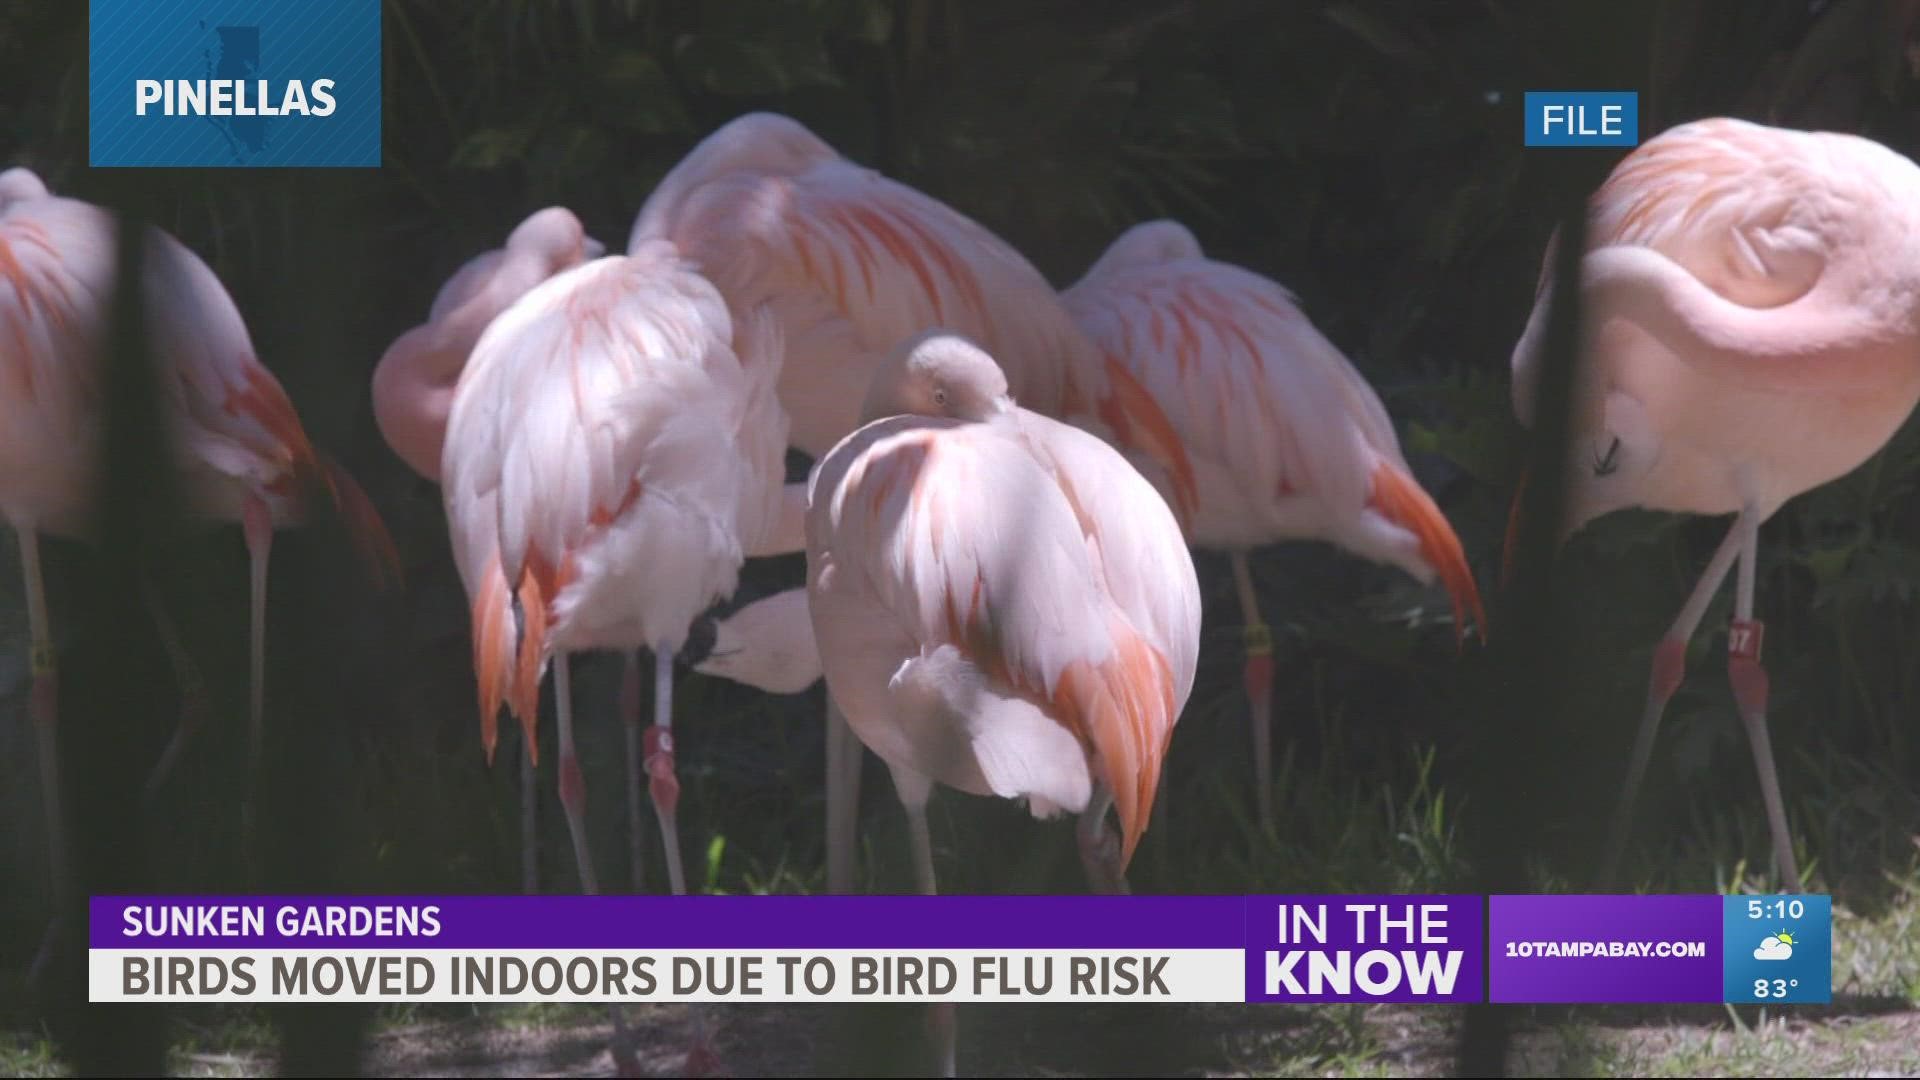 The flamingos and parrots have been moved indoors as a precaution.